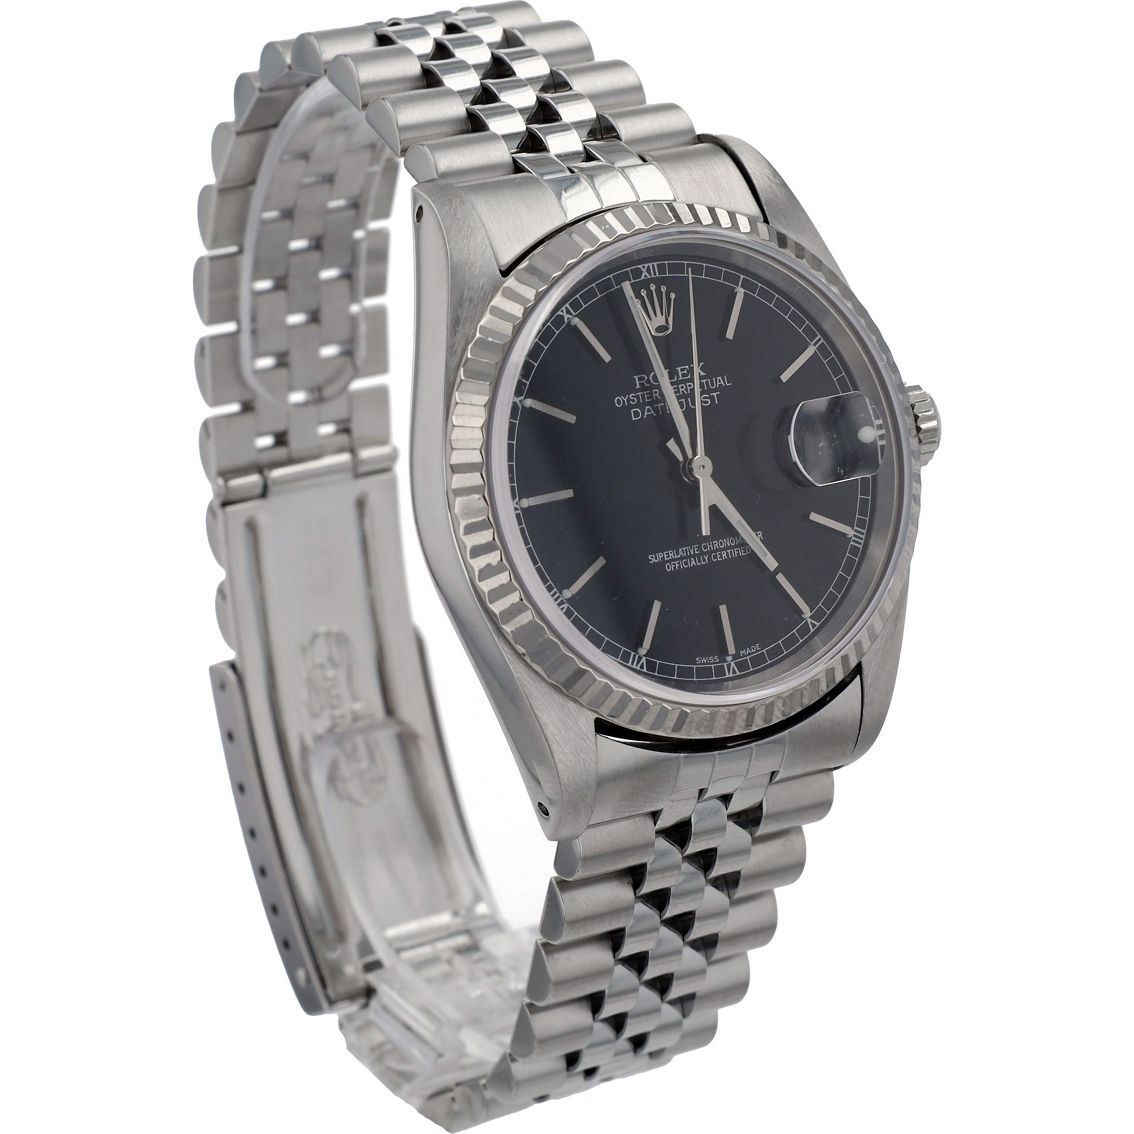 Rolex Men's Datejust Watch WLROLEX:OE88 (Pre-Owned) - Image 2 of 5